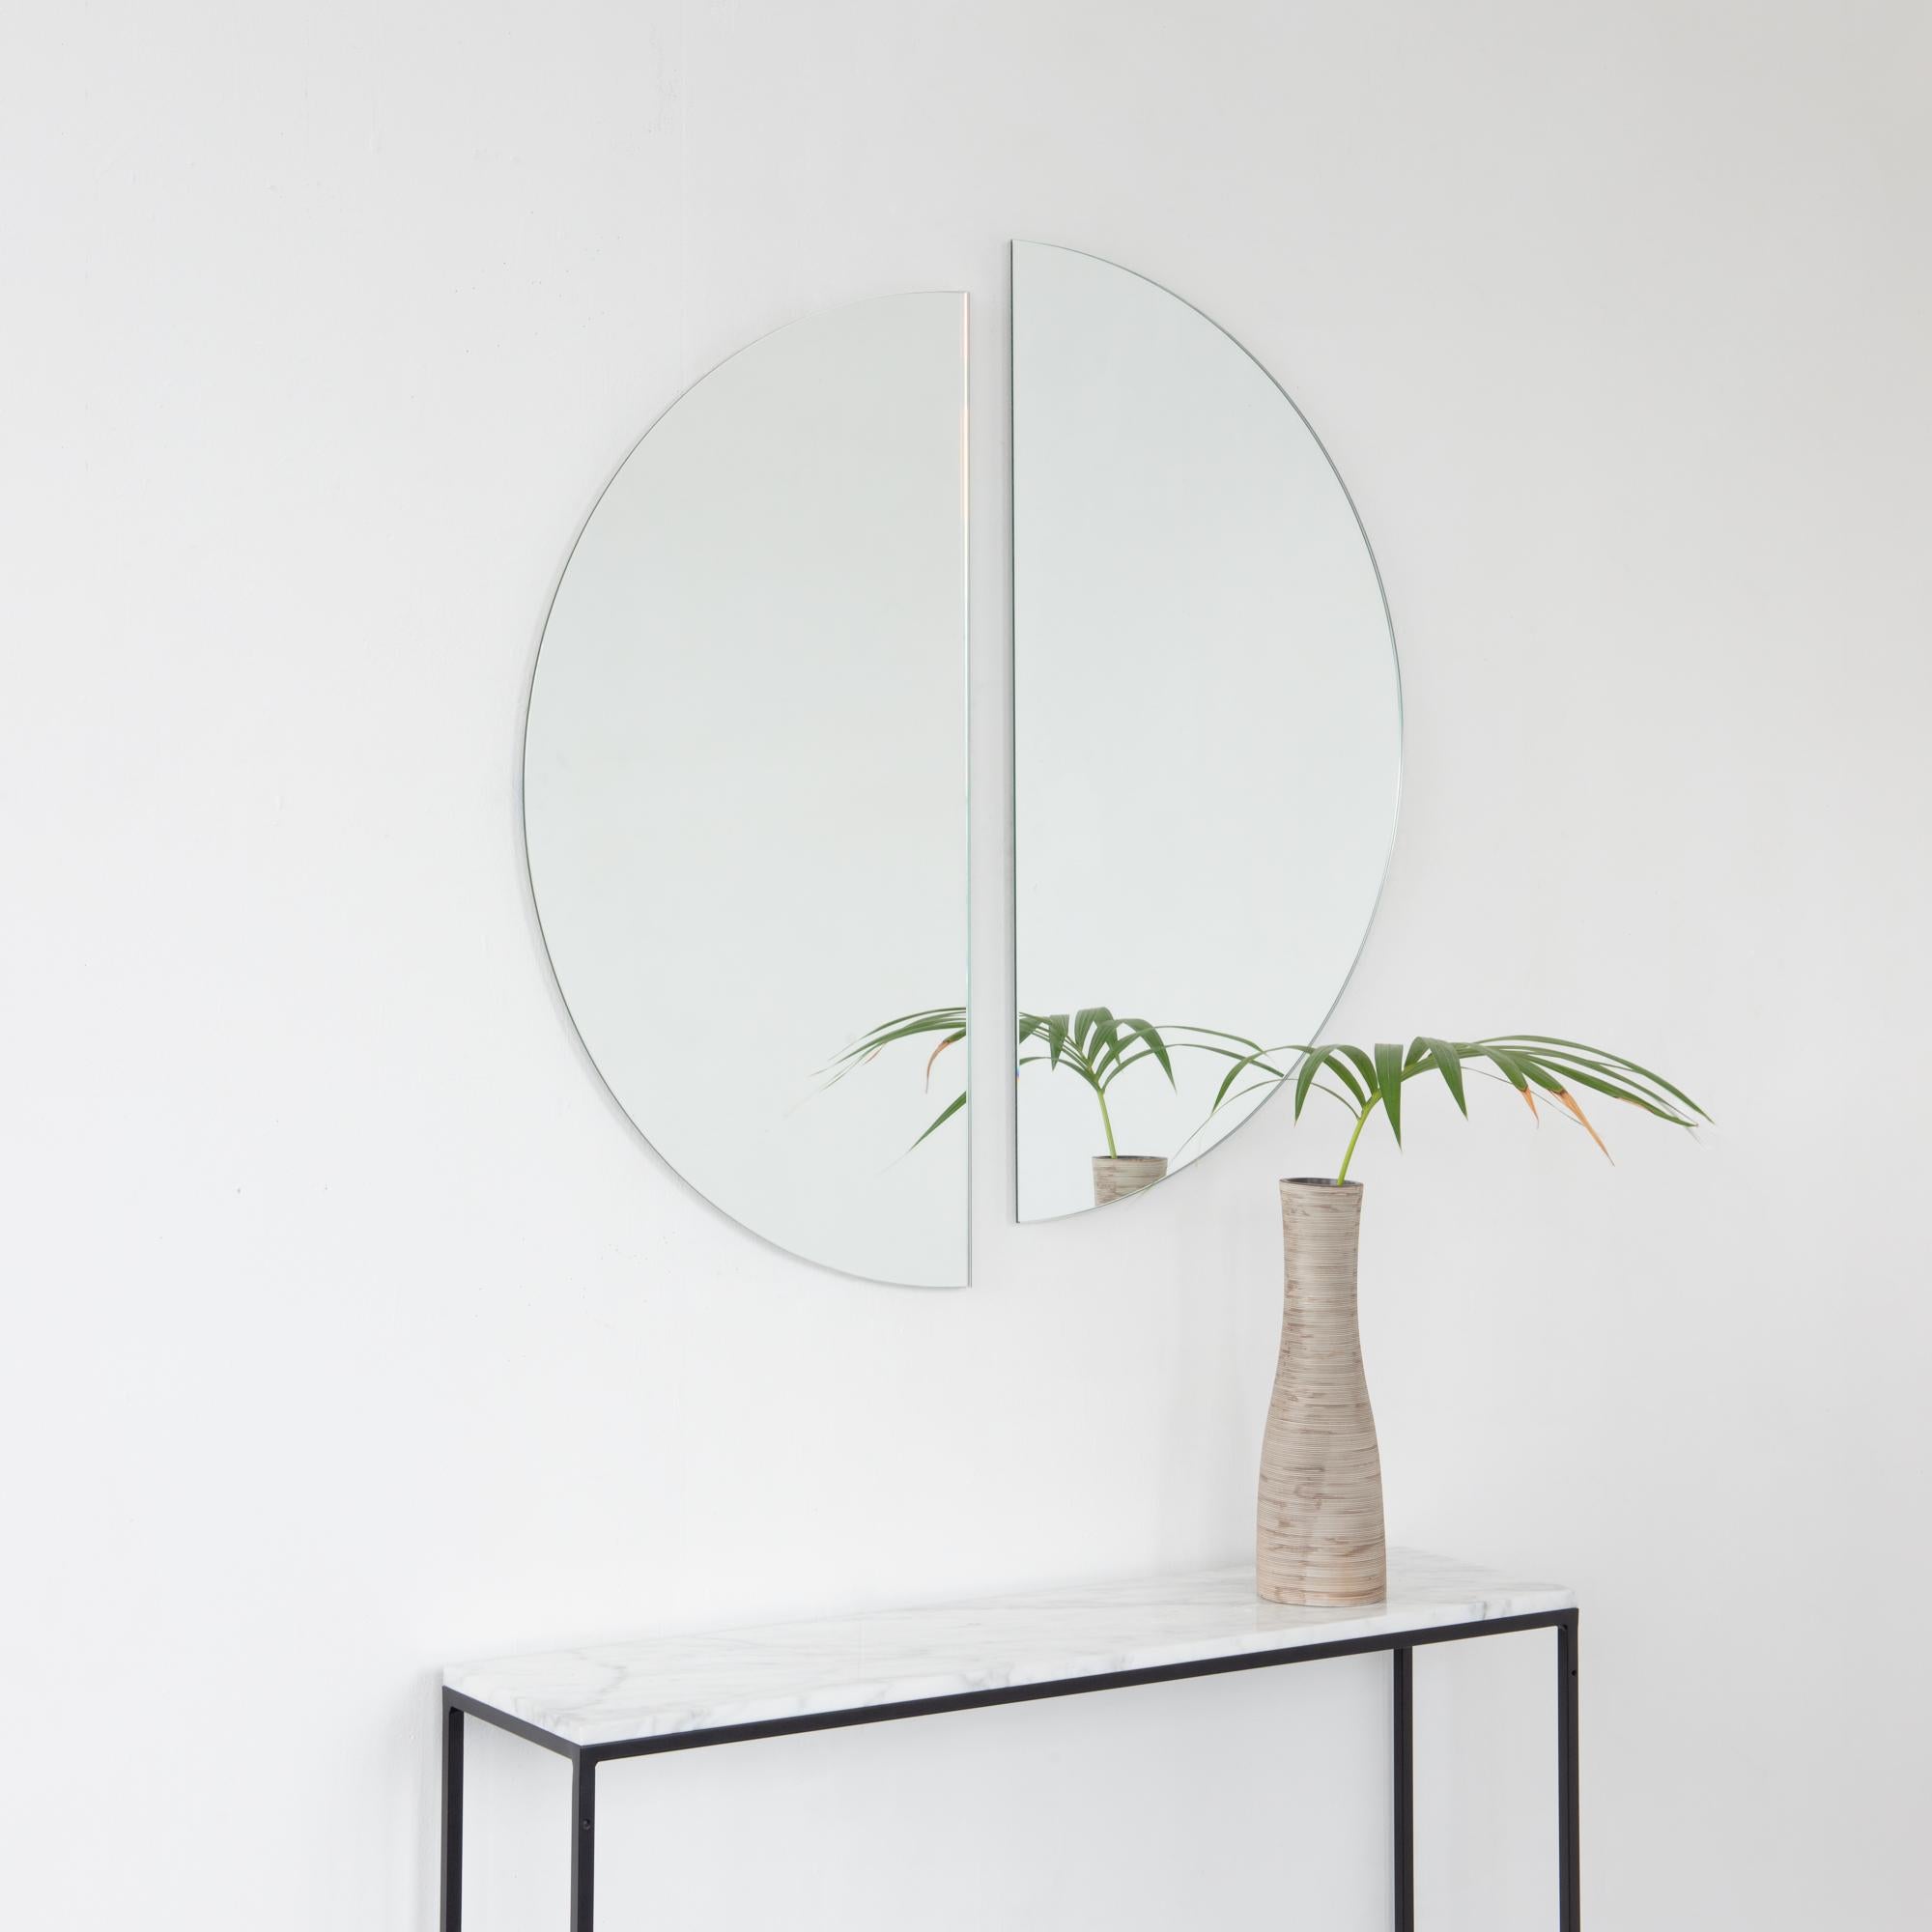 Set of two charming and minimalist Luna™ half-moon frameless mirrors with a floating effect. Fitted with a quality and ingenious hanging system for a flexible installation in 4 different directions. Designed and made in London, UK.

Our mirrors